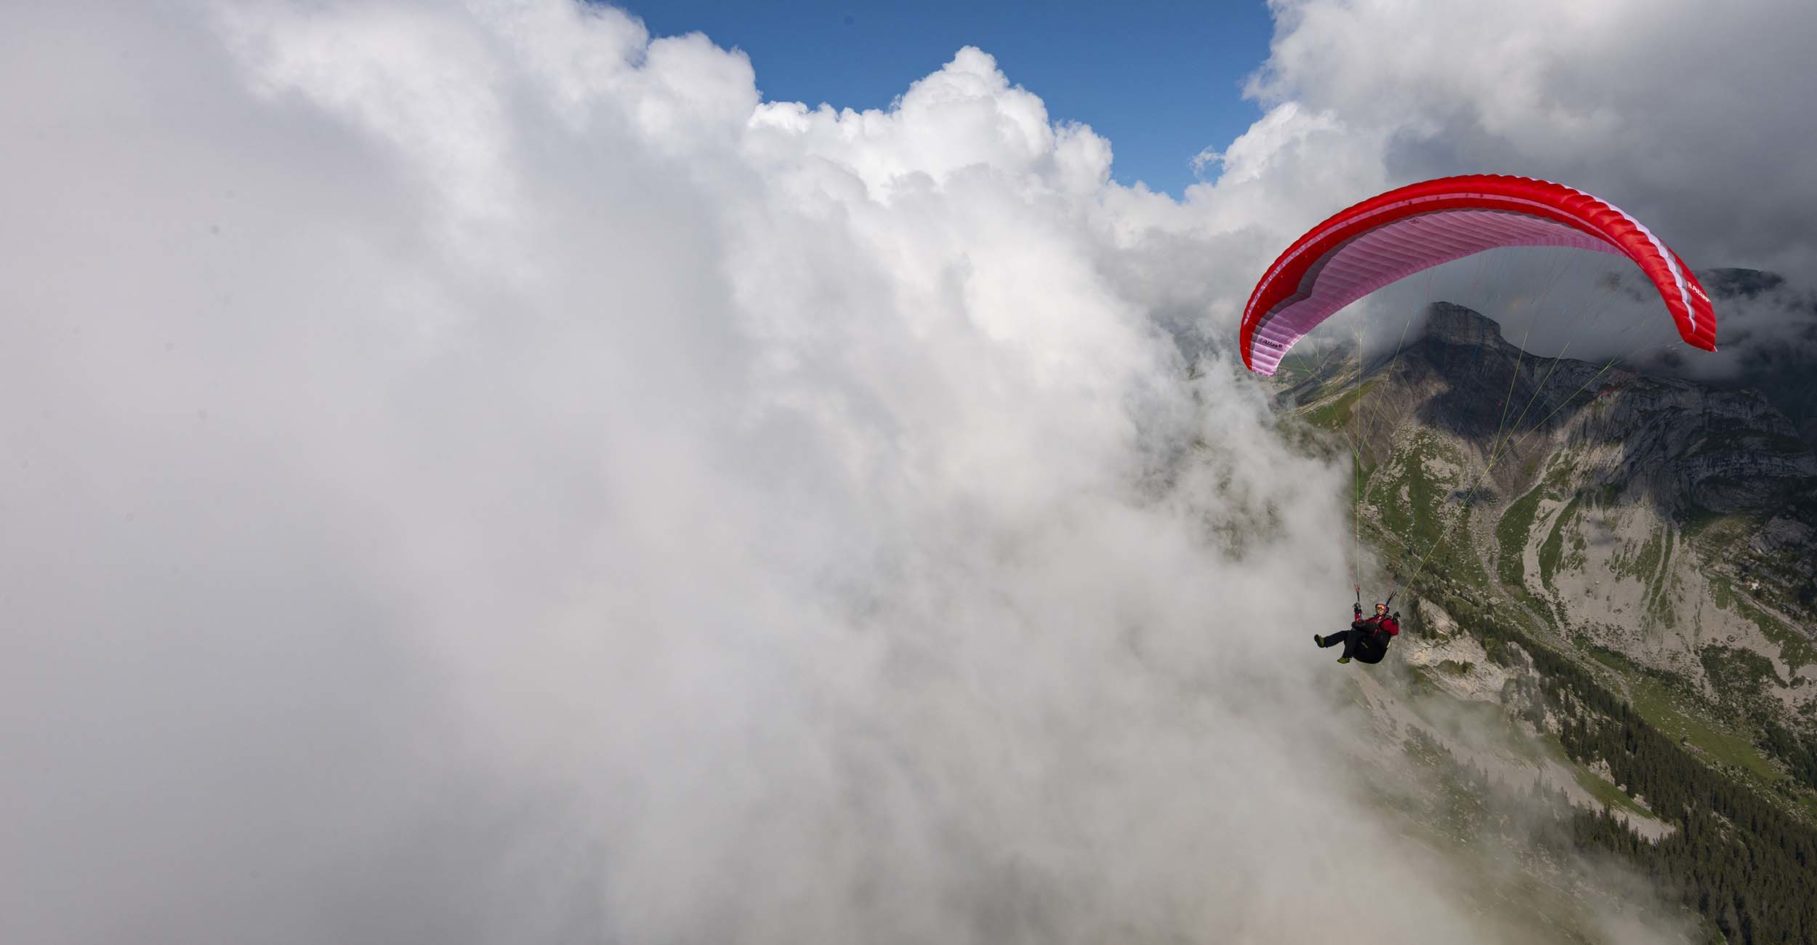 Getting up close and personal with the clouds. Photo: Jerome Maupoint